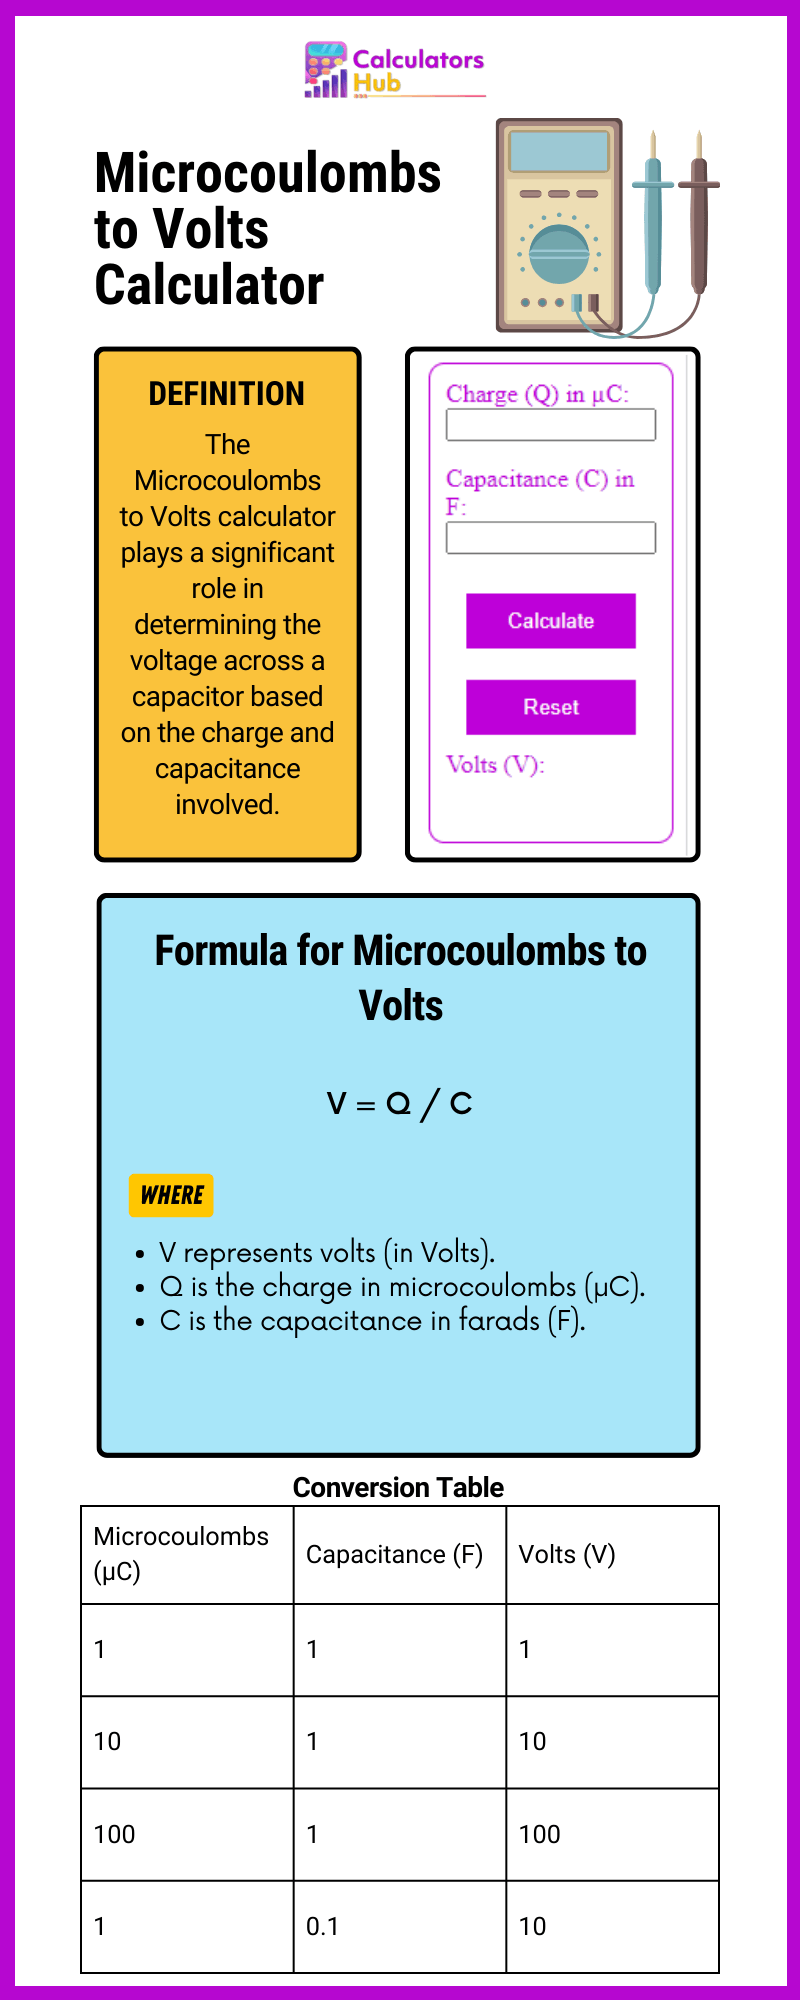 Microcoulombs to Volts Calculator